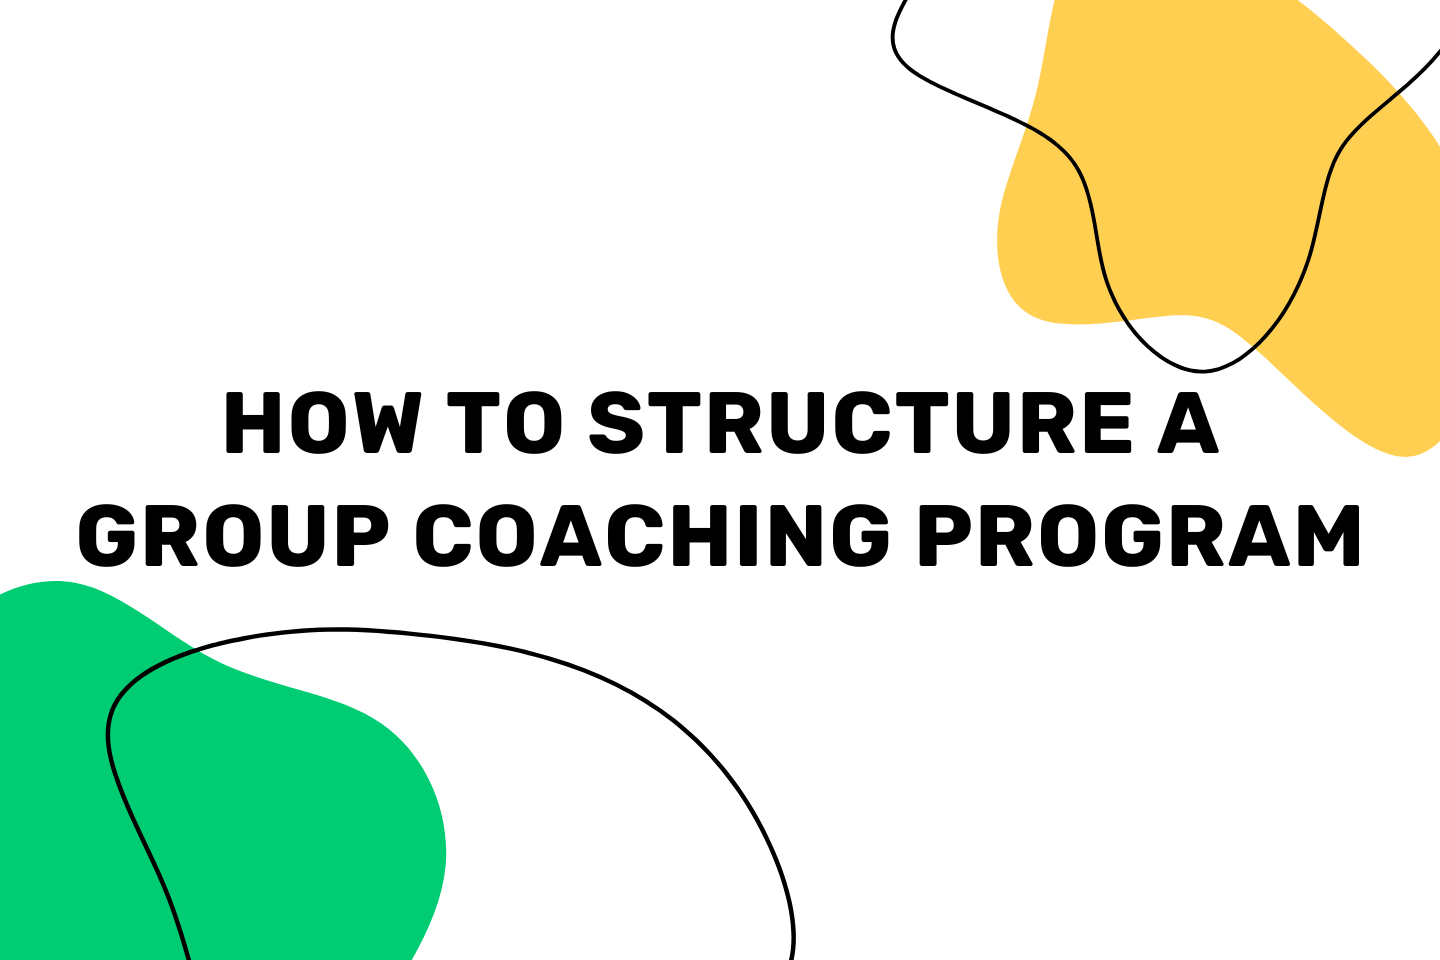 How to Structure a Group Coaching Program